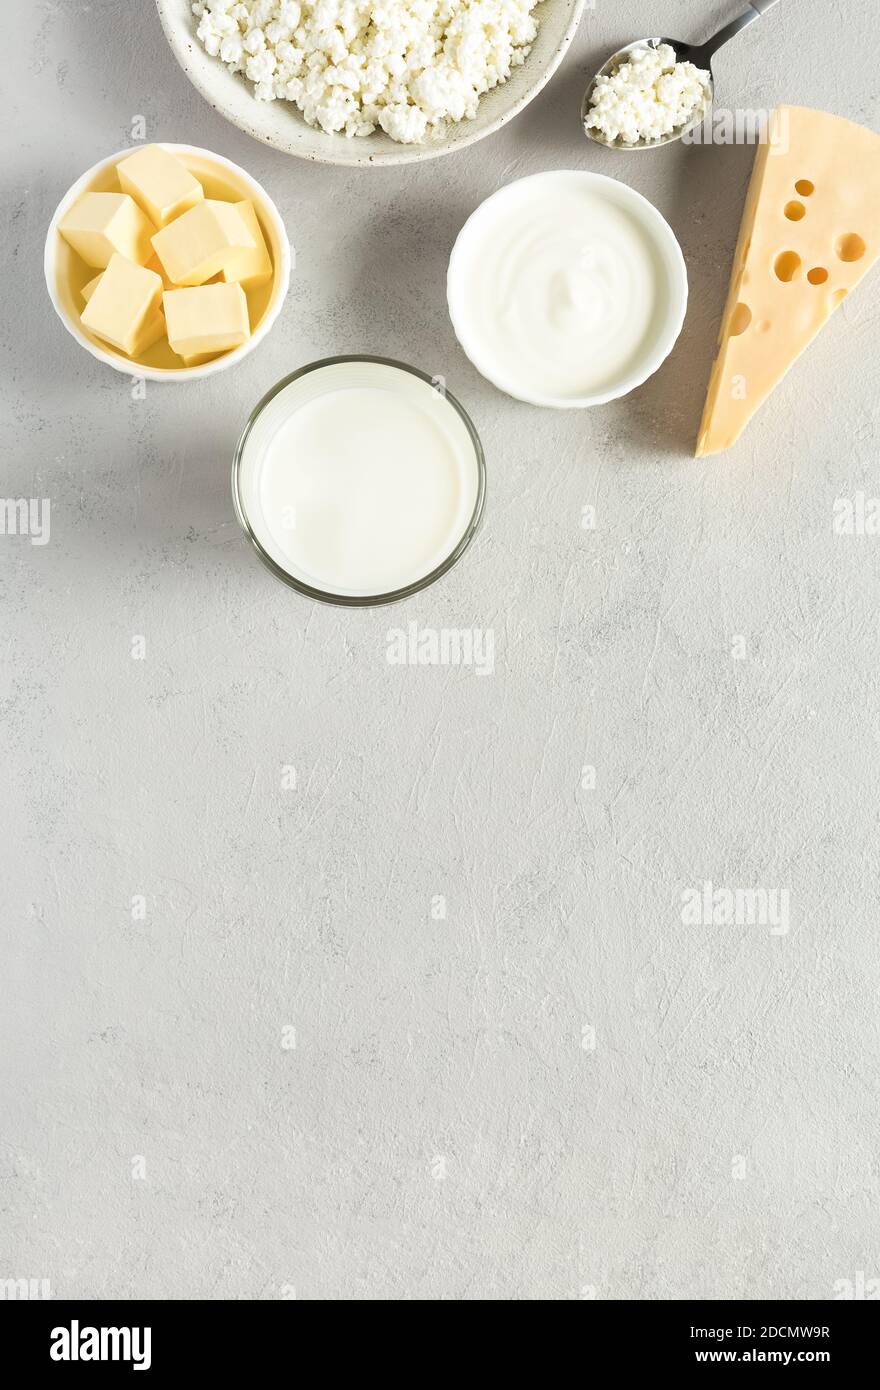 Natural, organic food most common dairy products are butter, cheese, milk, sour cream, cottage cheese flat lay on gray concrete background with copy s Stock Photo